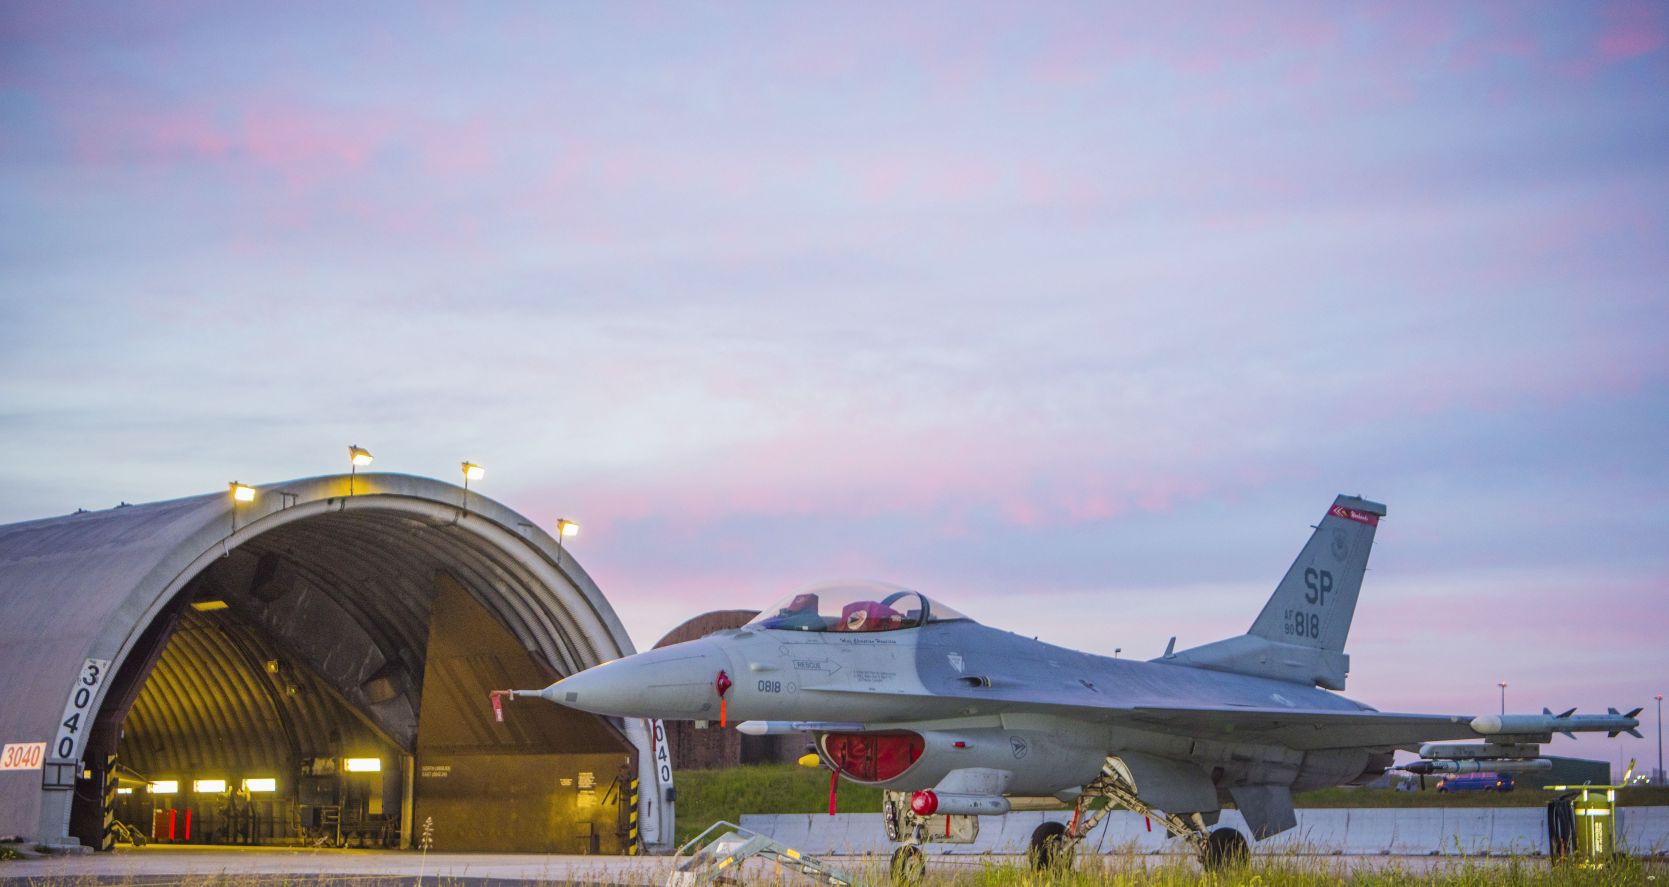 Berlin has welcomed Washington’s freeze on US troop reductions in Germany, including the transfer of the 480th Fighter Squadron, 52nd Fighter Wing, from Spangdahlem Air Base to Italy. (USAF/Airman 1st Class Alex Miller)